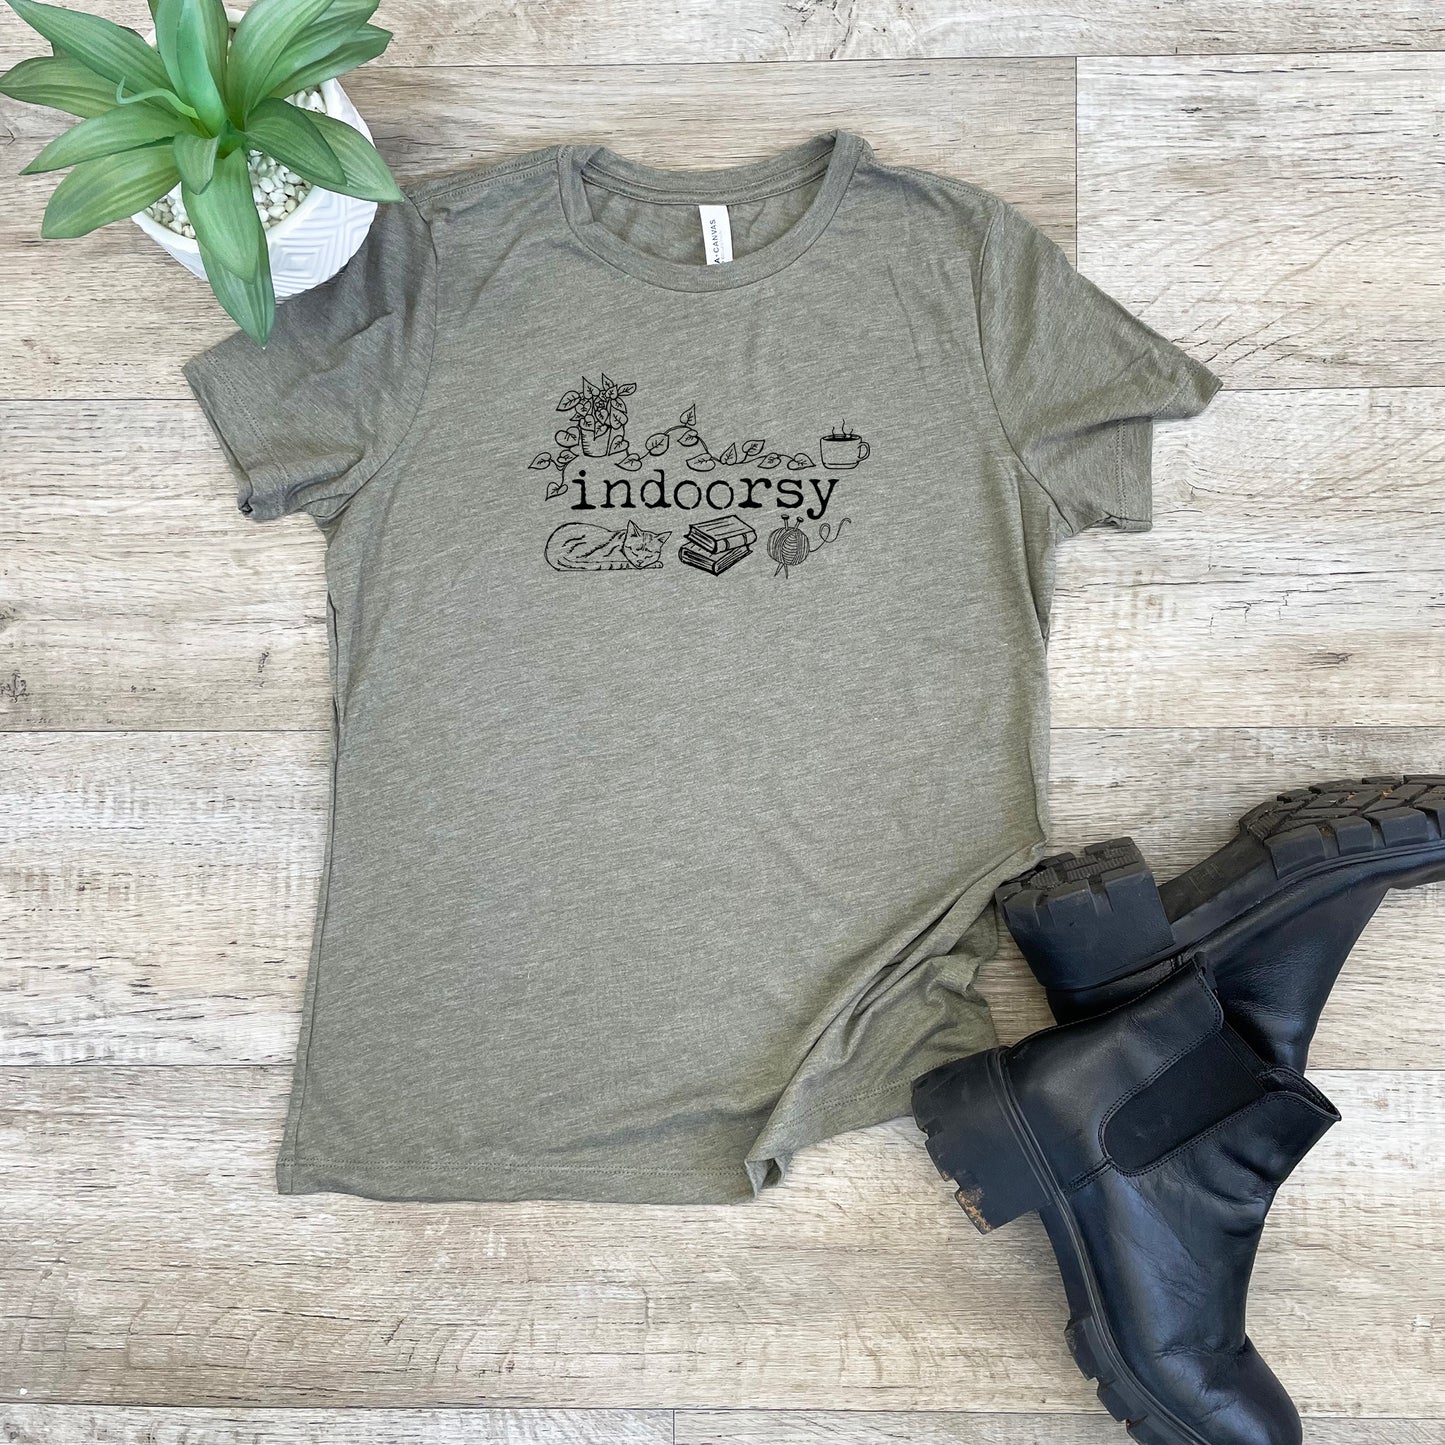 Indoorsy (Introverts, Cat) - Women's Crew Tee - Olive or Dusty Blue